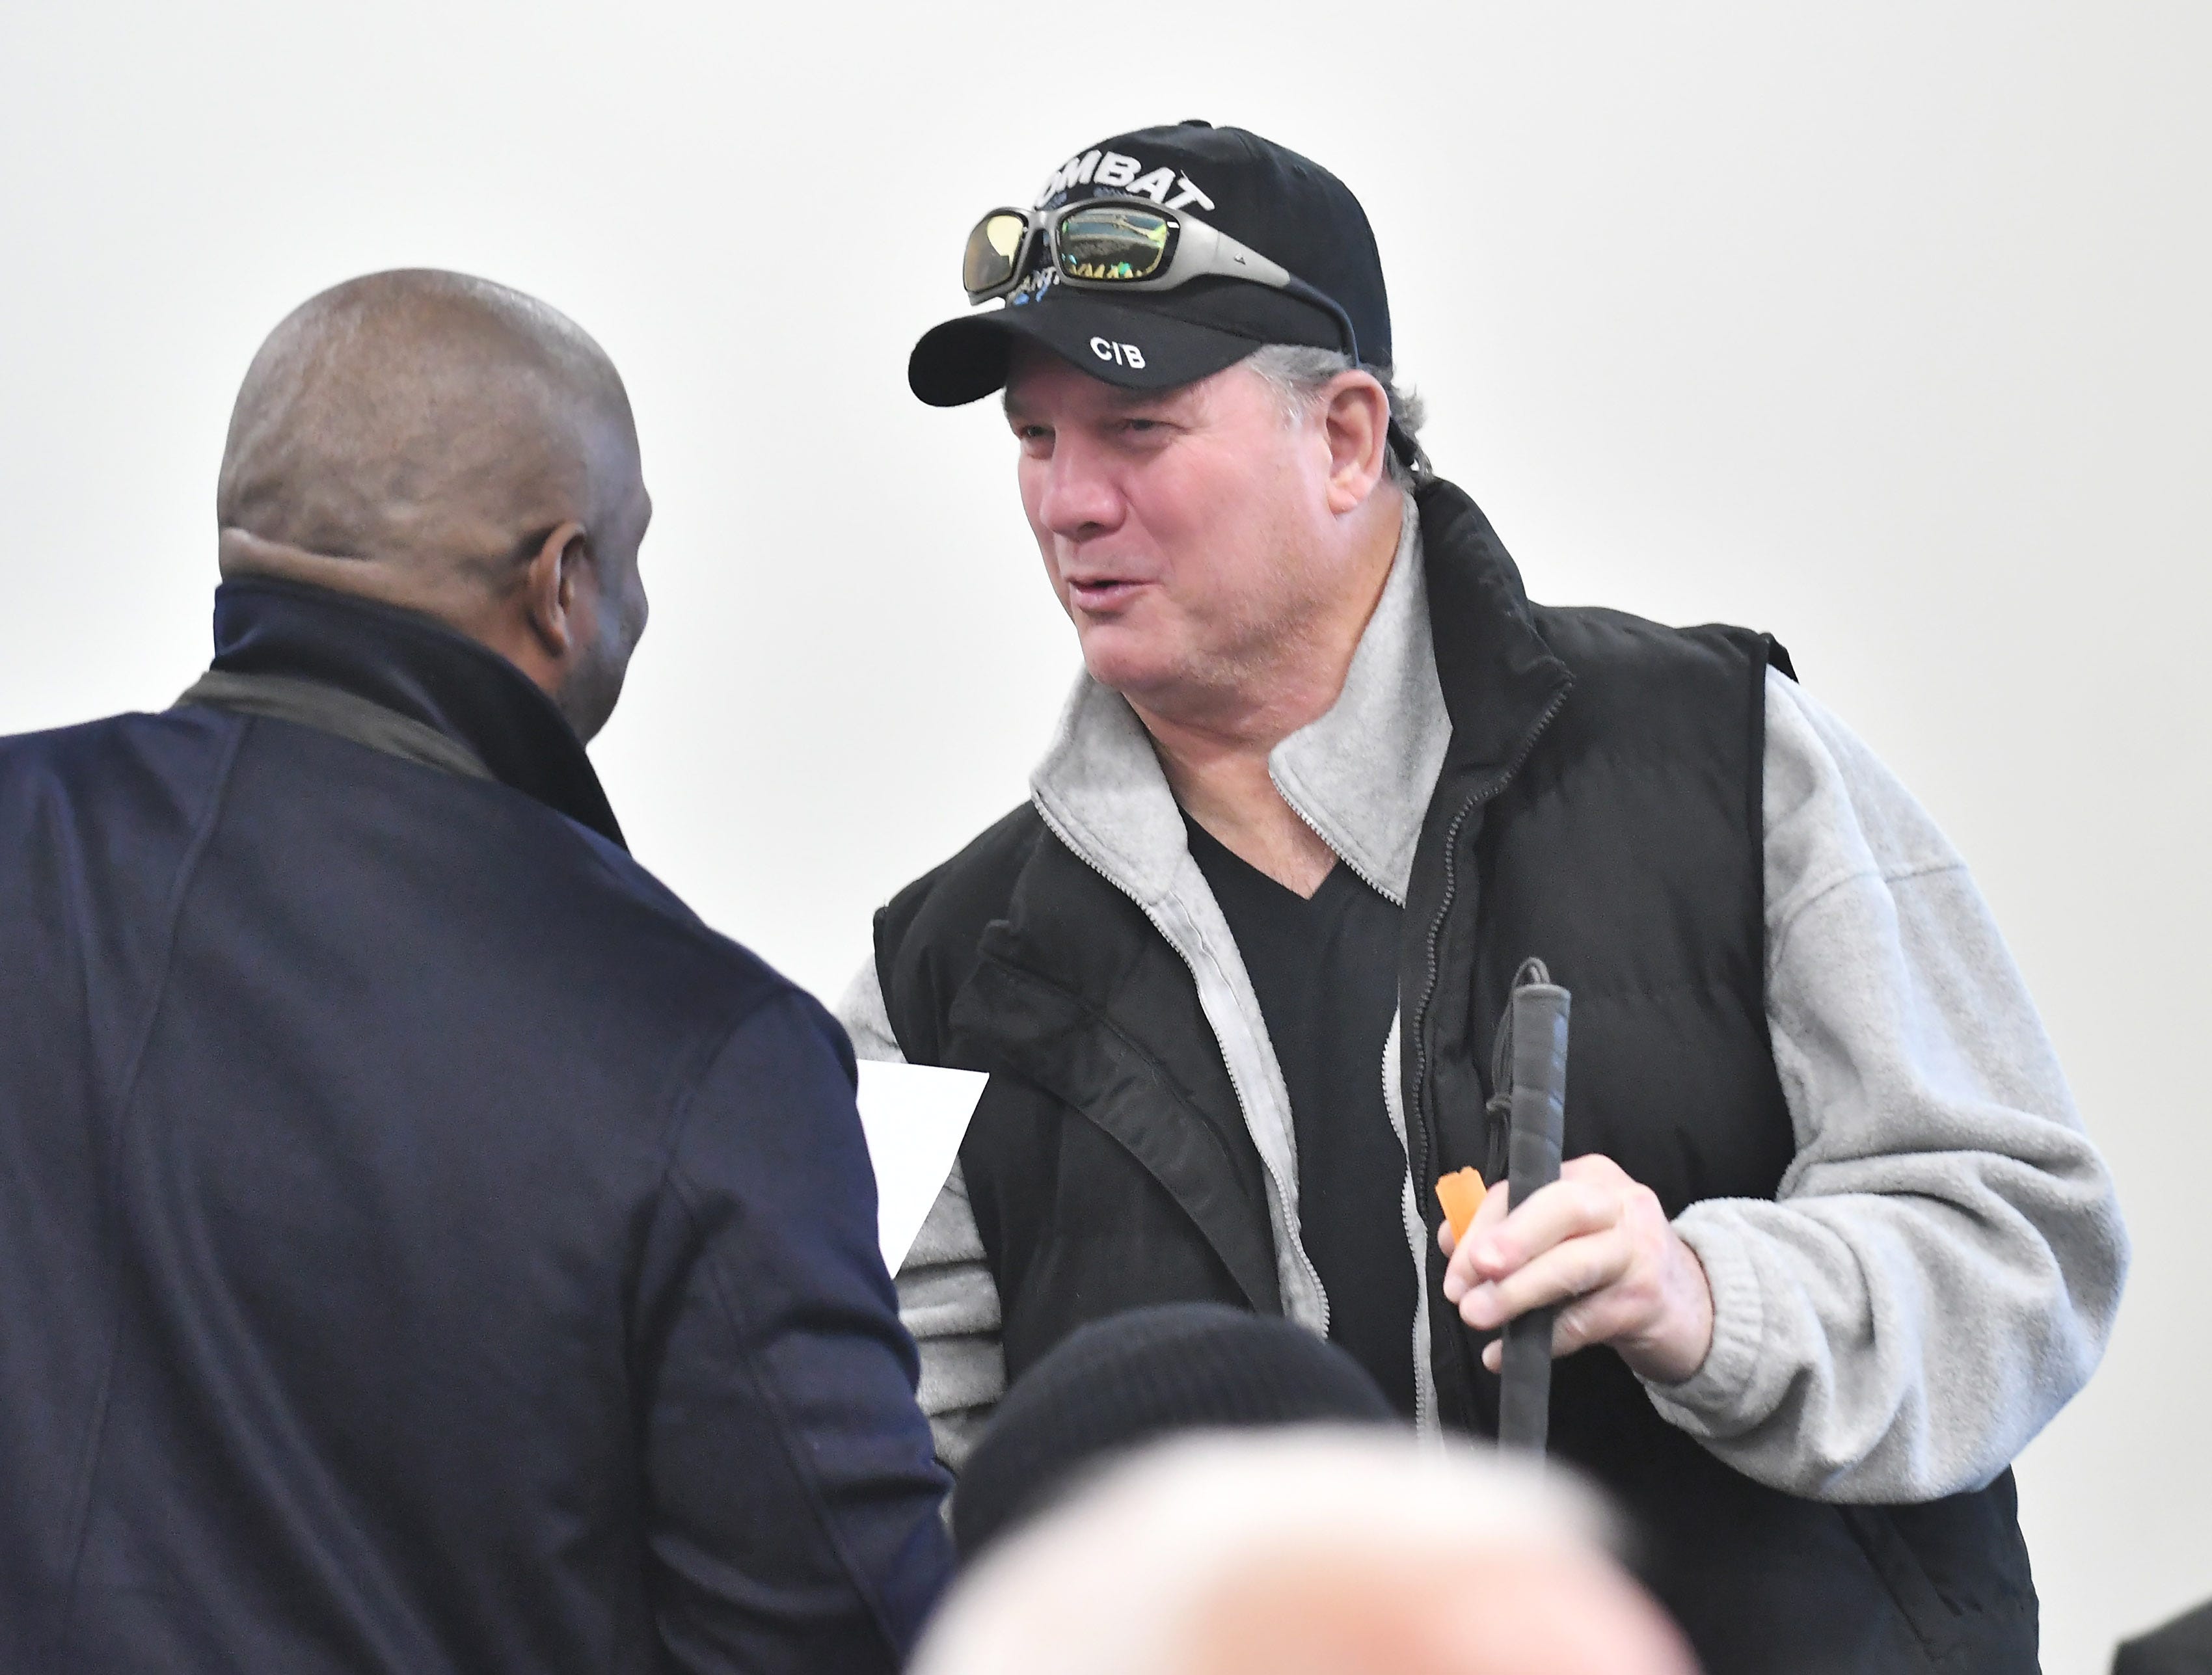 Tigers hitting coach Lloyd McClendon presents Vietnam combat veteran Charles Zimmer of Port Huron with some Tigers tickets during a stop on the 2019 Detroit Tigers Winter Caravan at the John D. Dingell VA Medical Center in Detroit on Jan. 24, 2019.